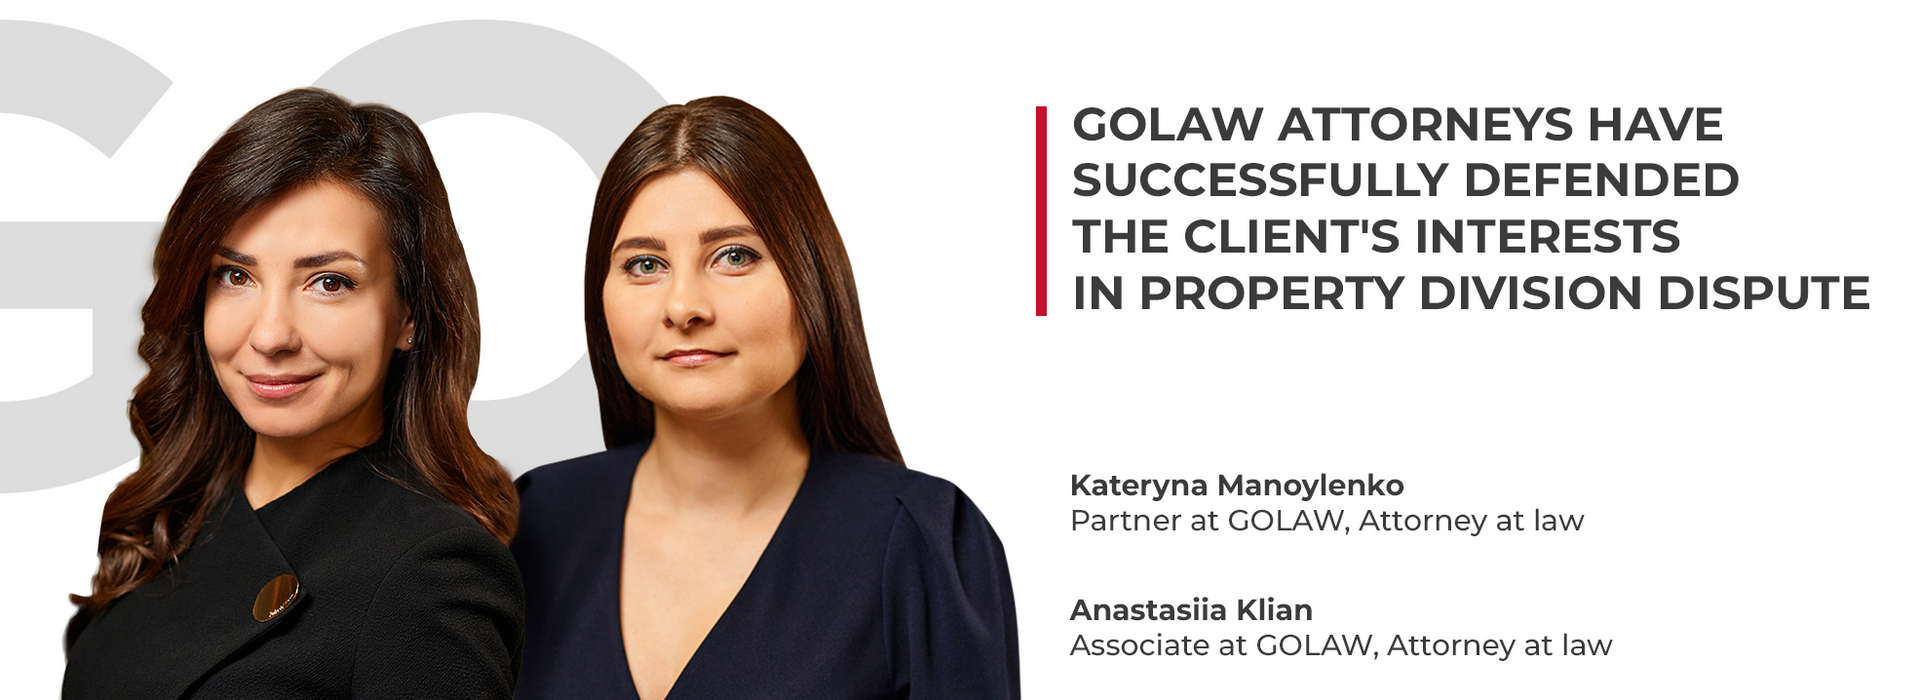 GOLAW Attorneys Have Successfully Defended the Client’s Interests in Property Division Dispute